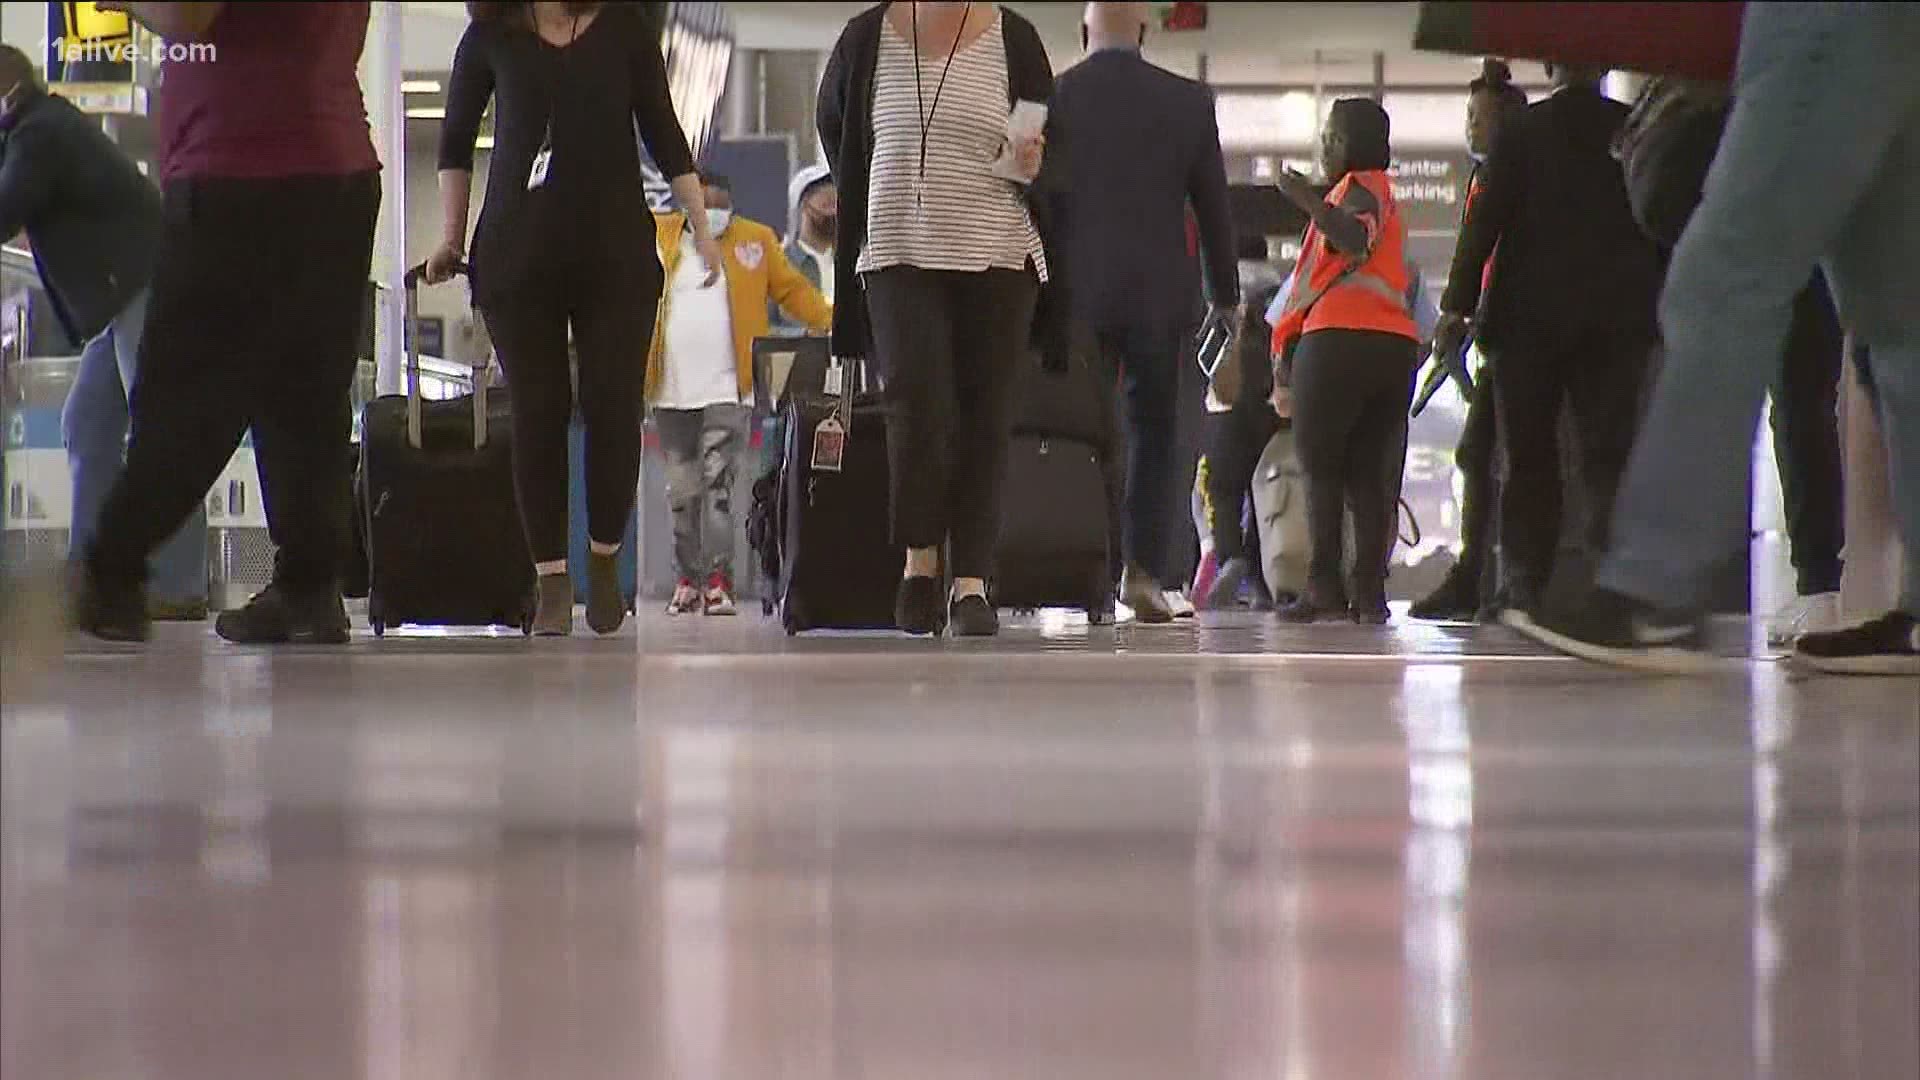 Here's what health experts are recommending for those traveling during the holidays.